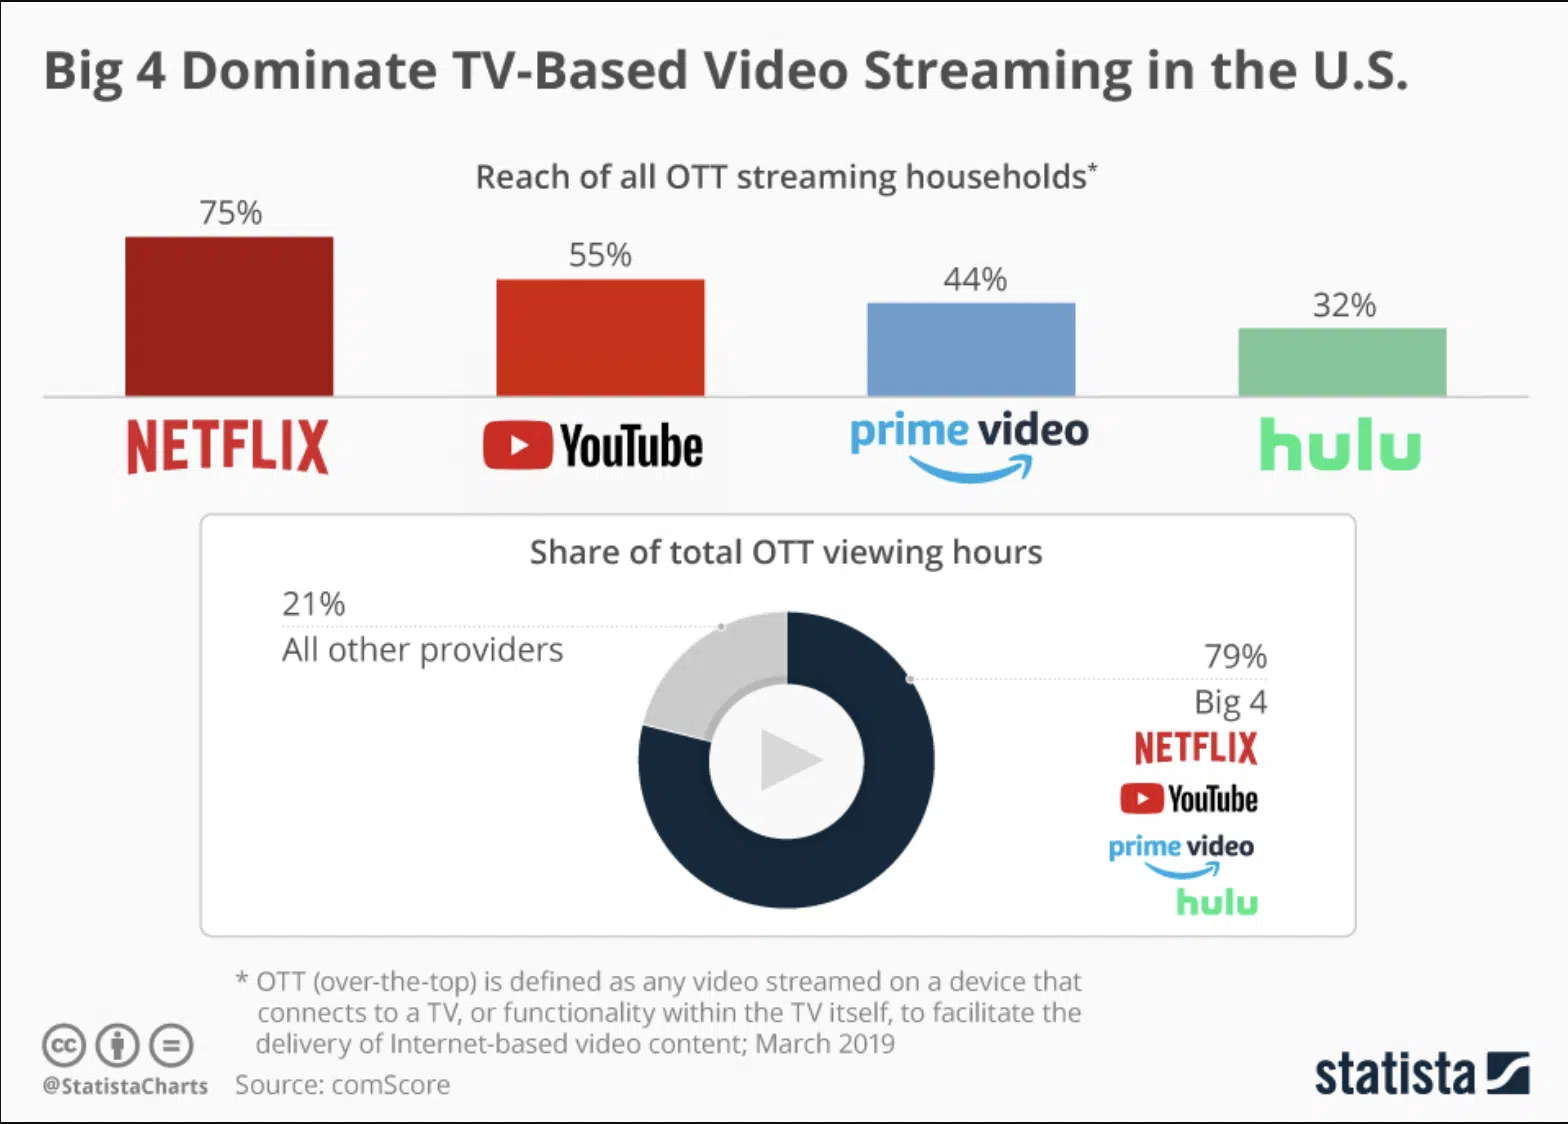 Big 4 video streaming services in the U.S.